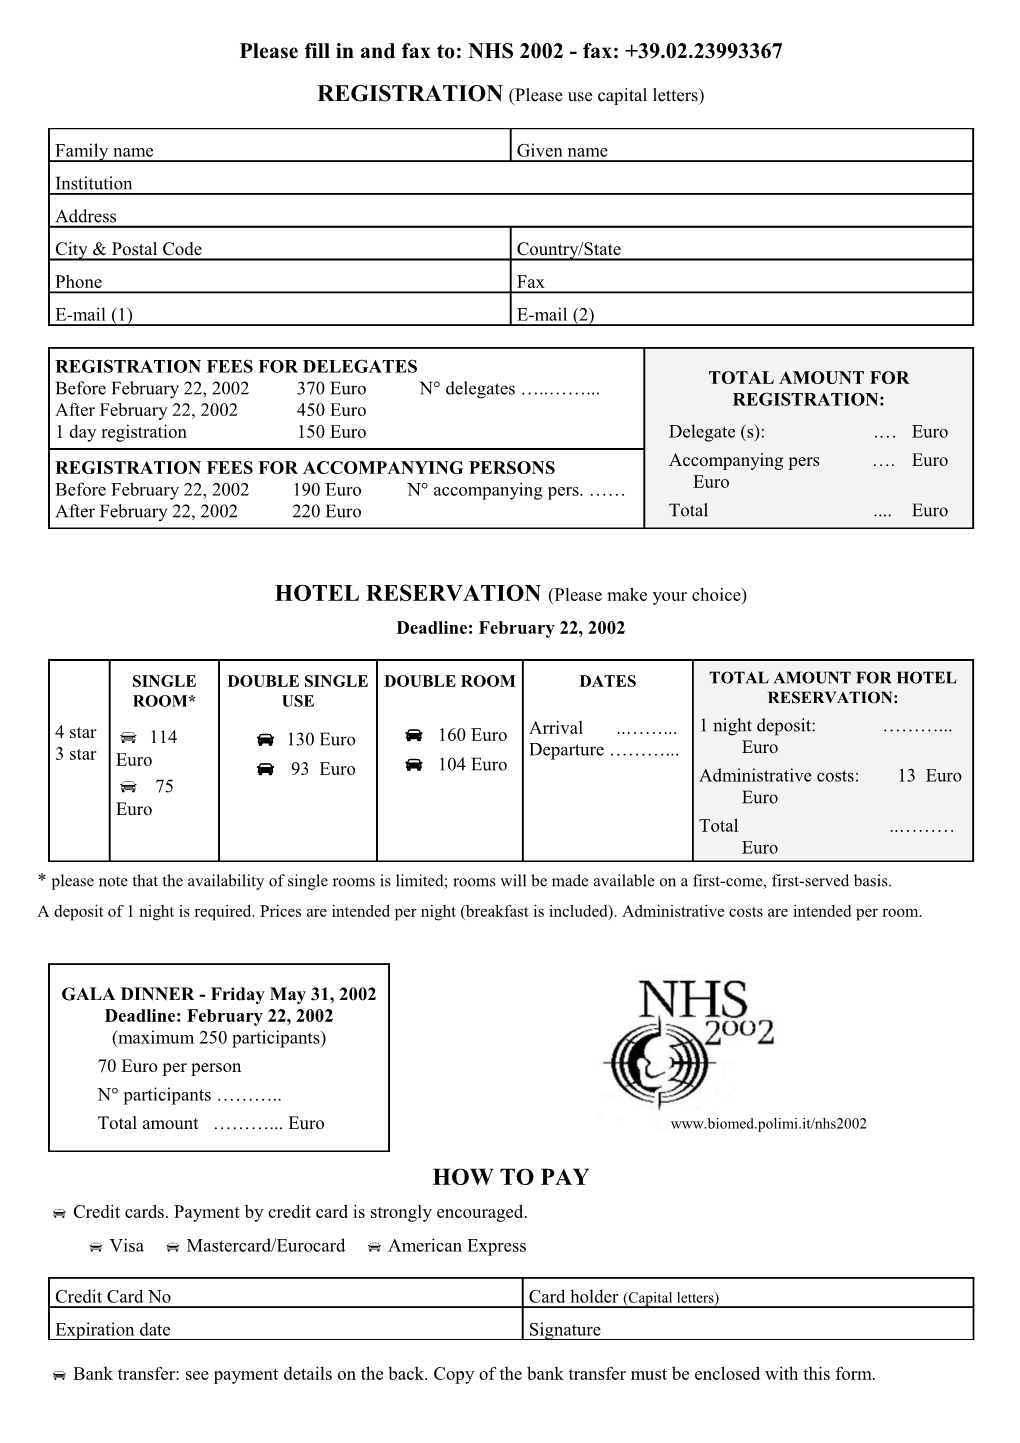 Please Fill and Fax To: NHS 2000 - Fax: +39